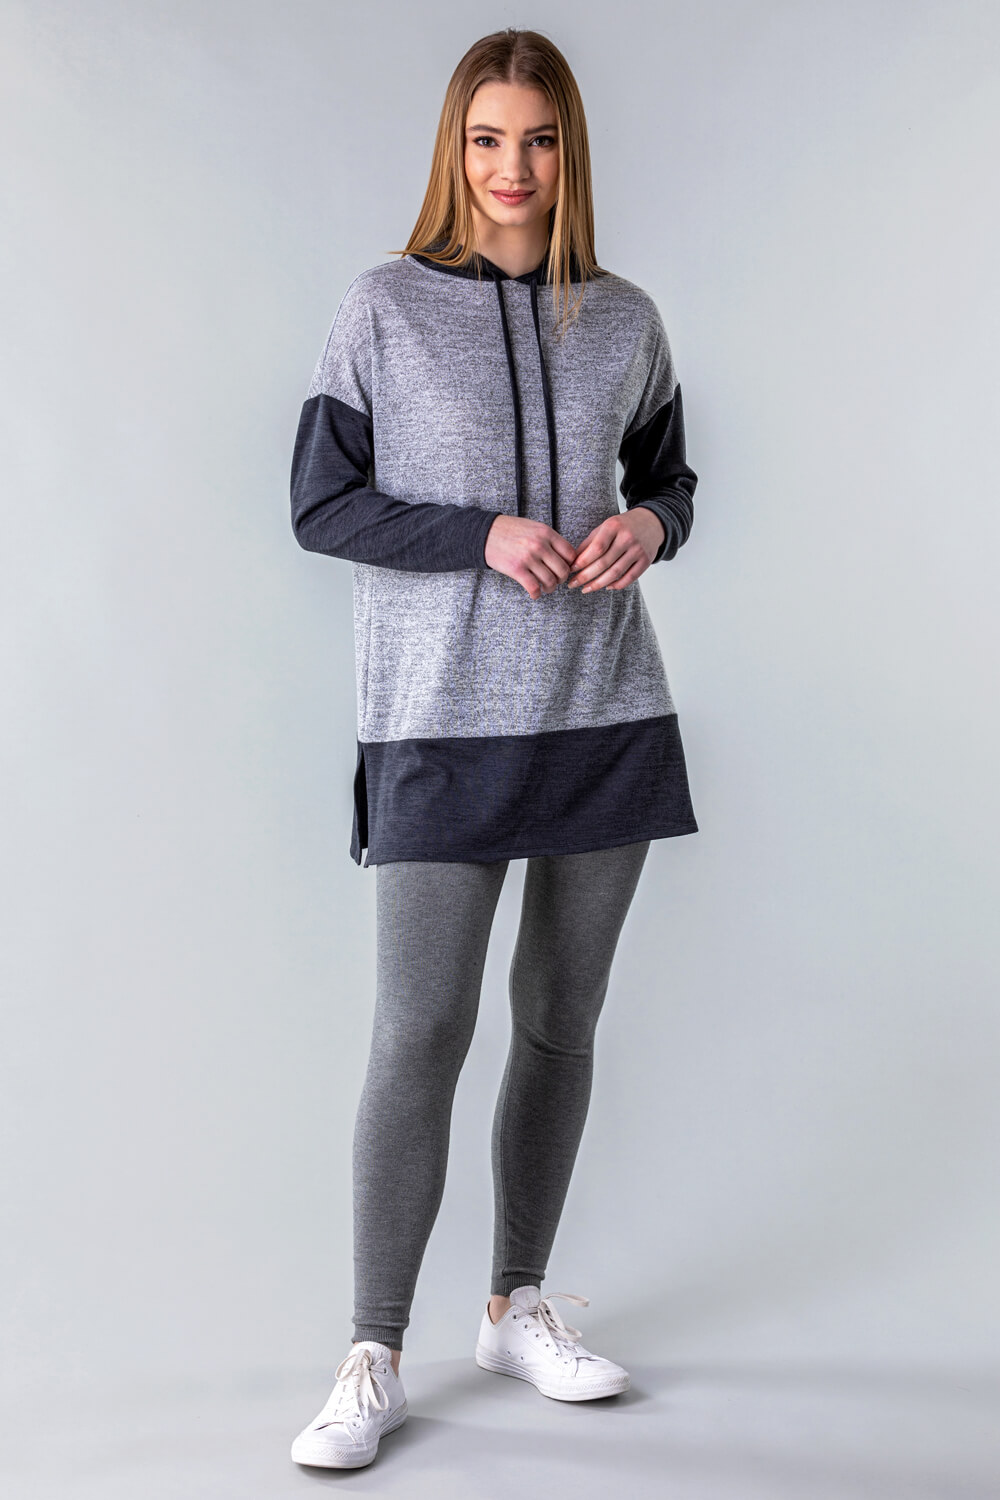 Grey Two Tone Lounge Hooded Top, Image 2 of 4